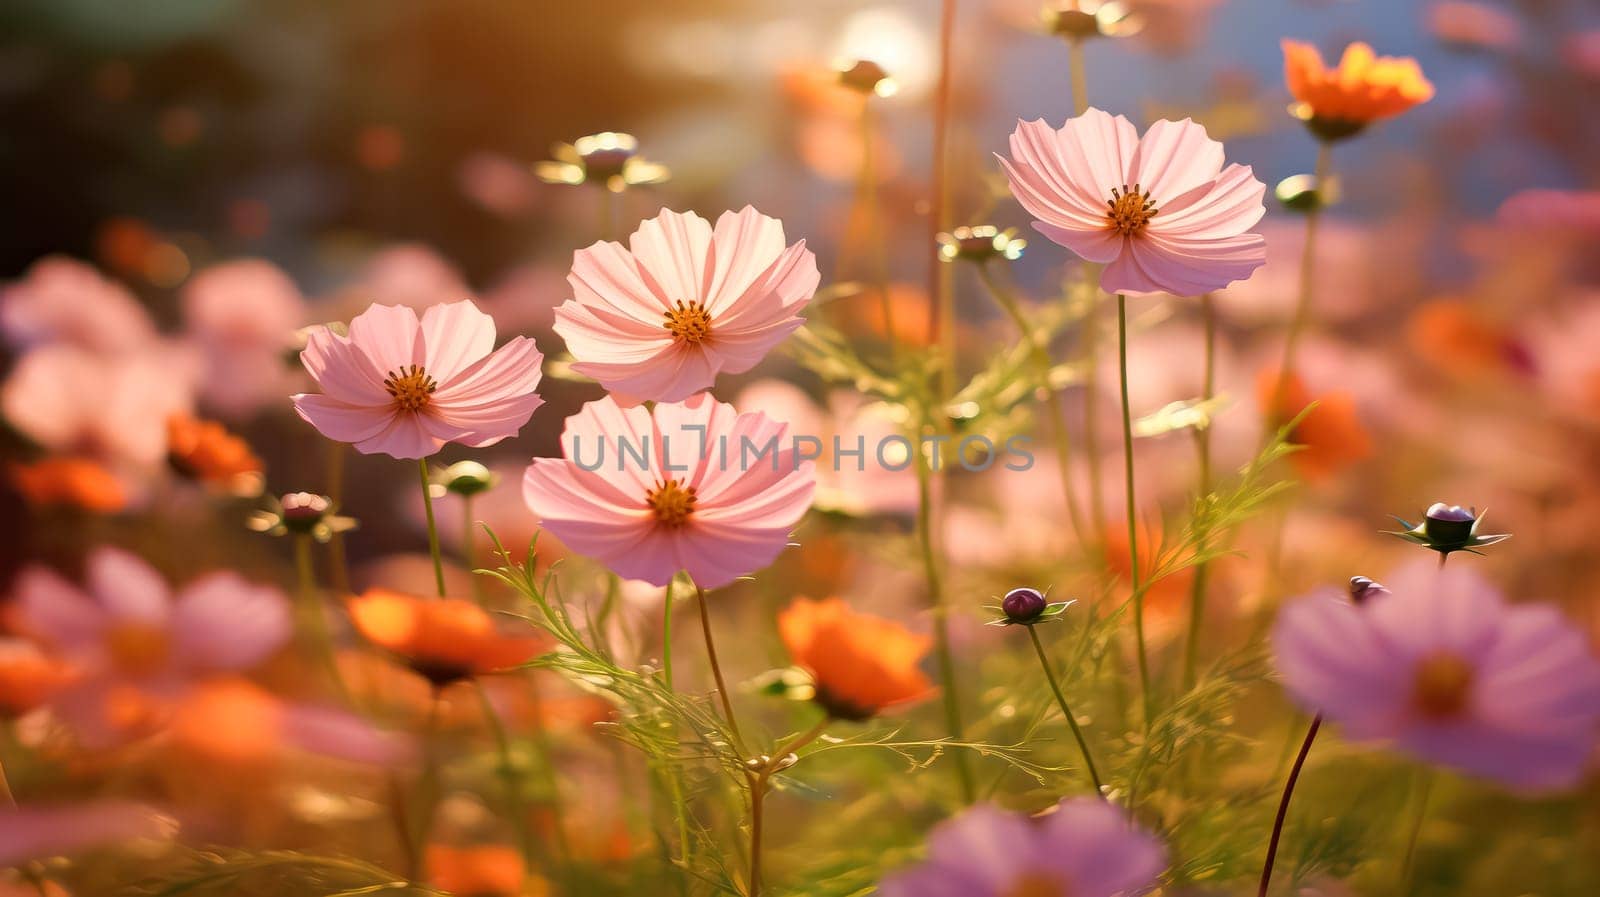 Vibrant cosmos flowers bloom gracefully in the garden by Alla_Morozova93